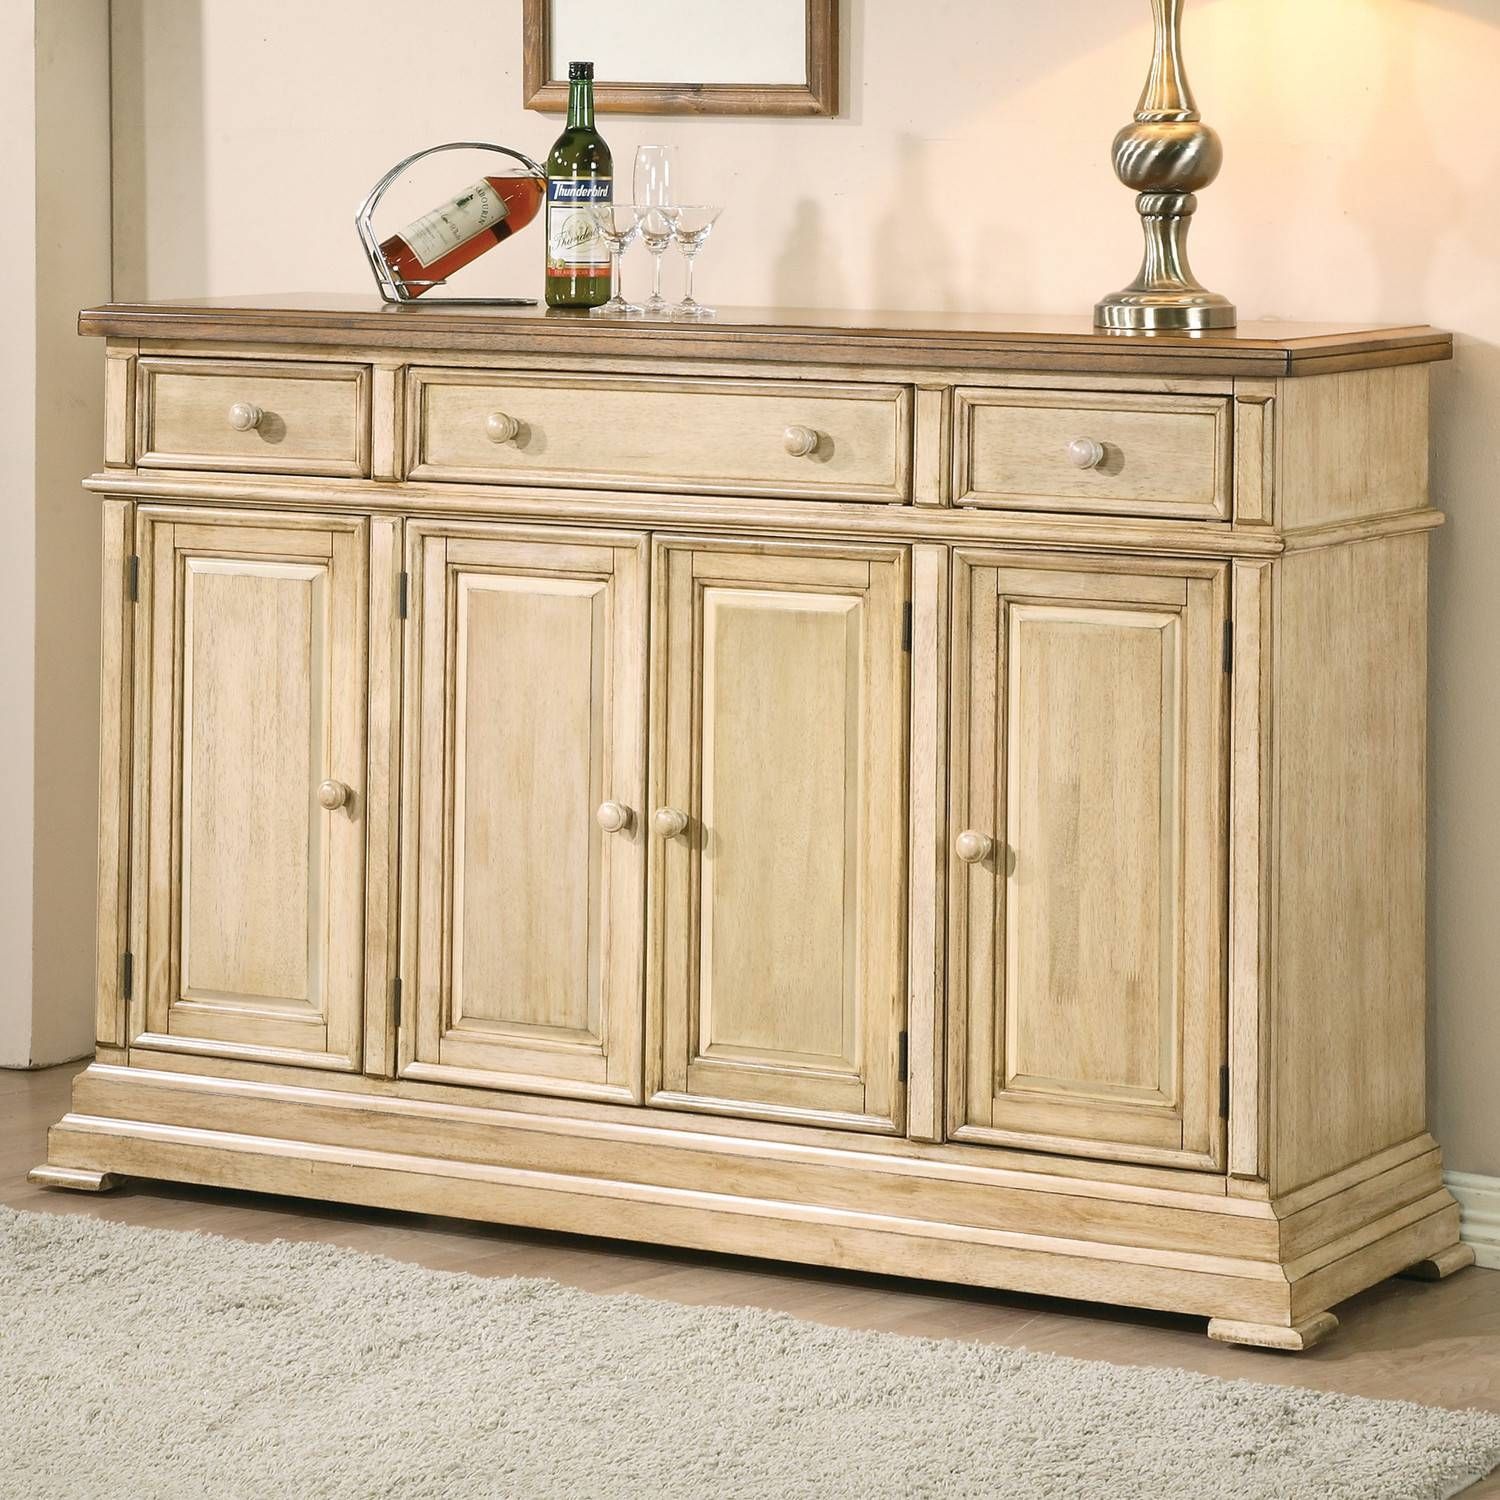 Best Of White Buffet Sideboard – Bjdgjy For 2018 Glass Door Buffet Sideboards (View 13 of 15)